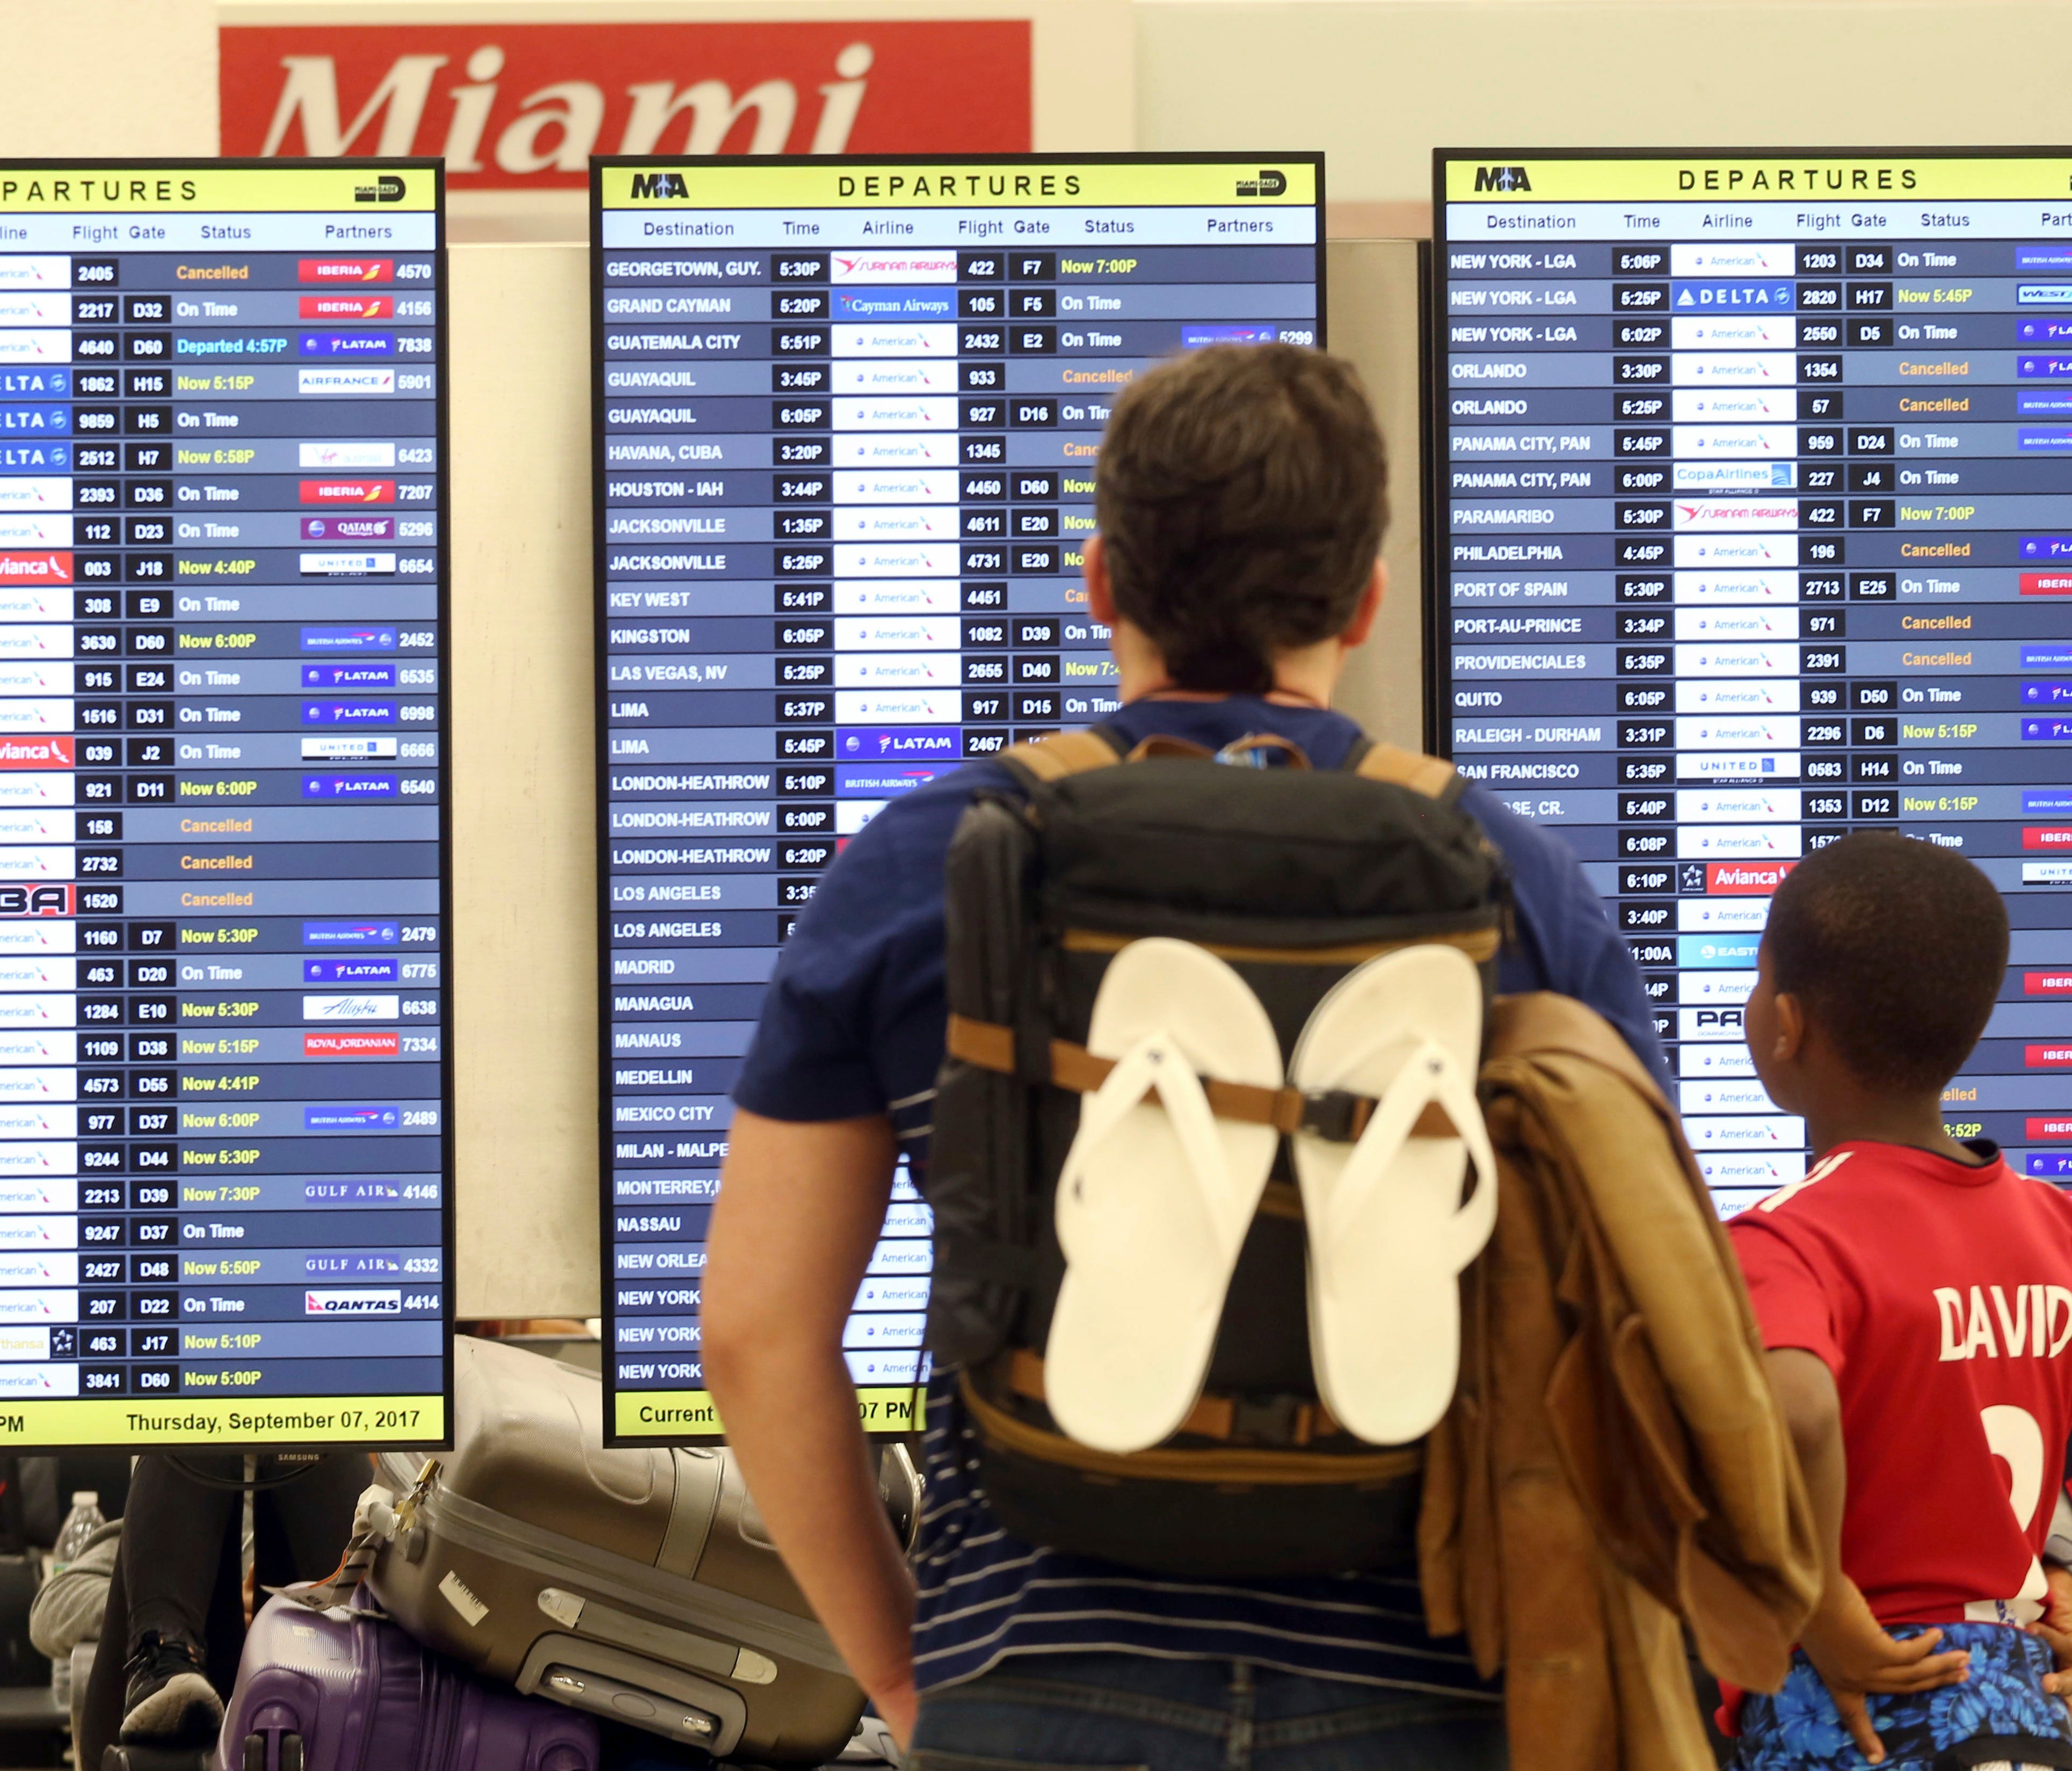 Passengers check the departure board at Miami International Airport on Thursday, Sept. 7, 2017.